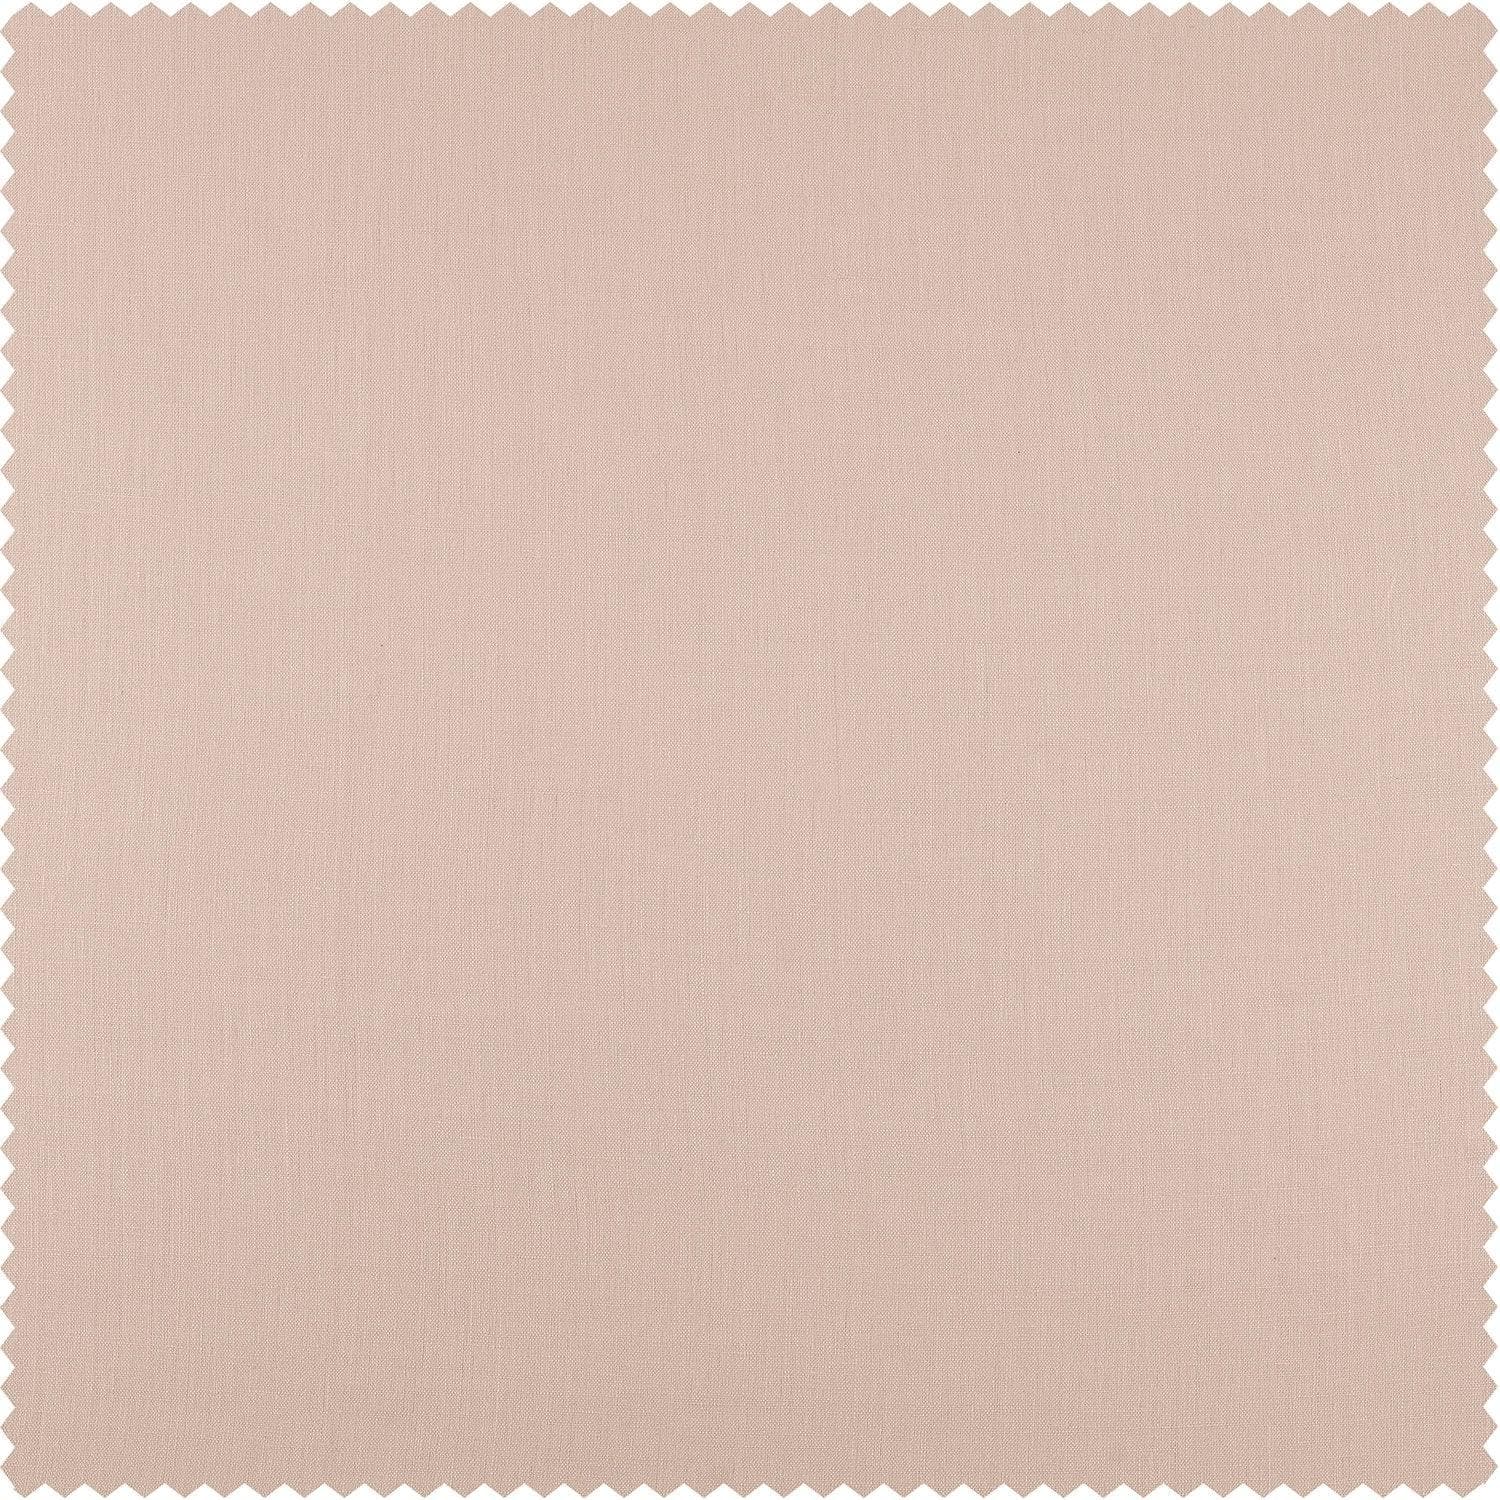 Cherry Blossom Pink Deluxe French Linen Swatch